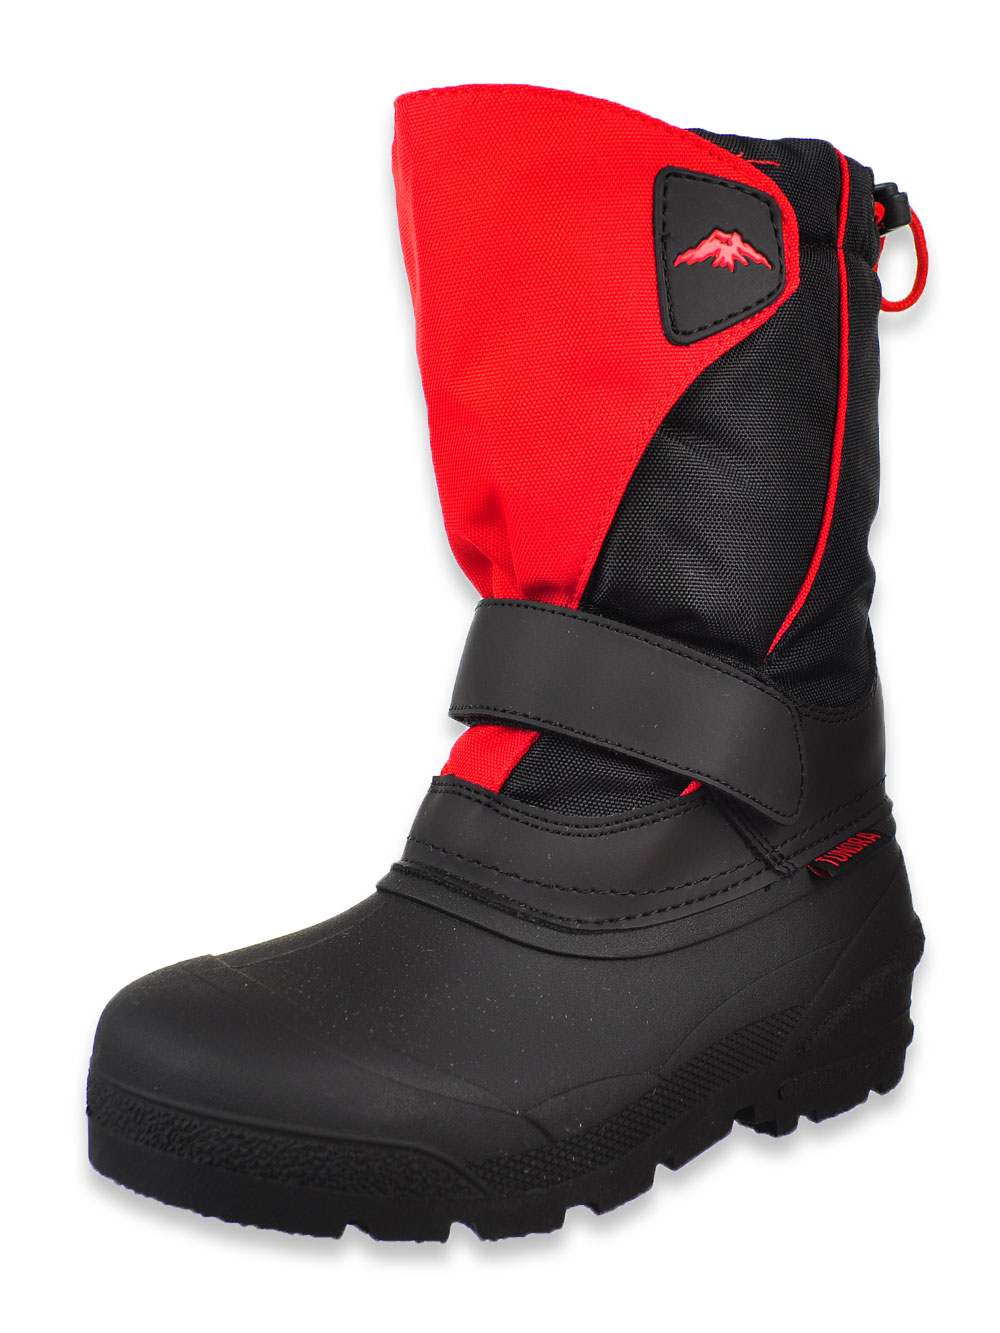 Tundra Boys' Quebec Winter Boots (Sizes 